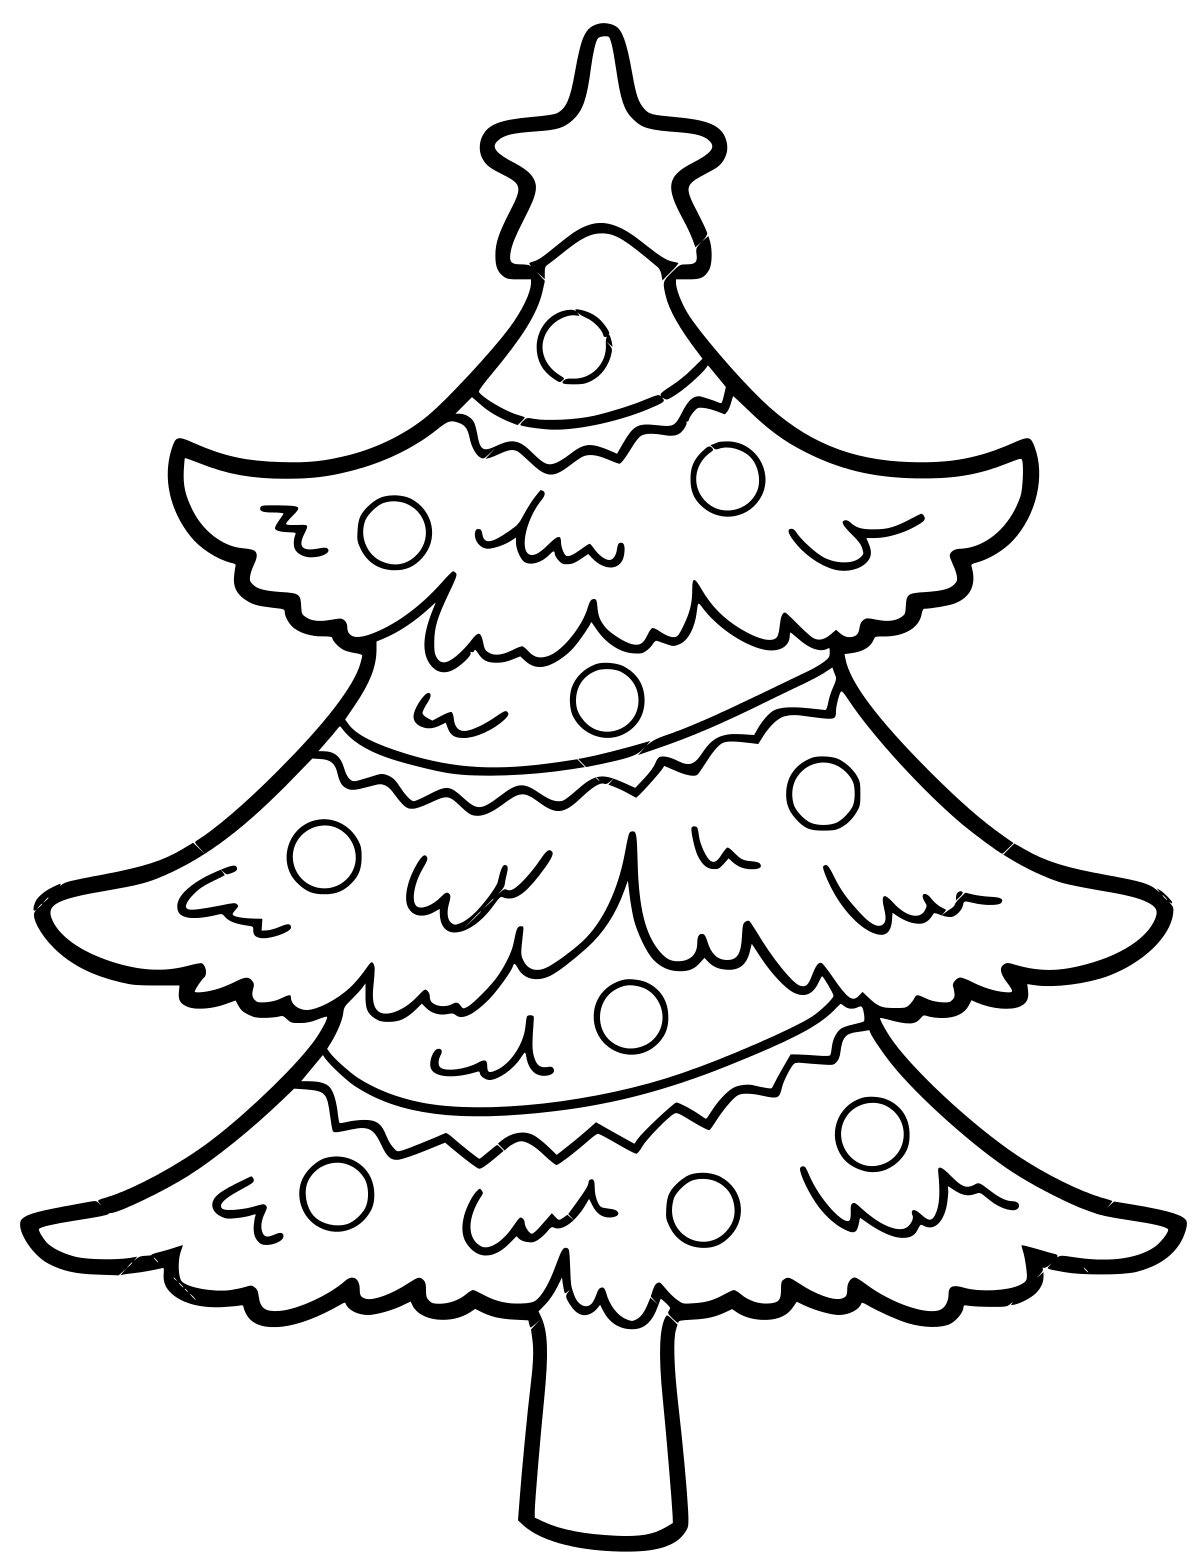 Creative Christmas Tree Coloring Pages - Coloring Cool